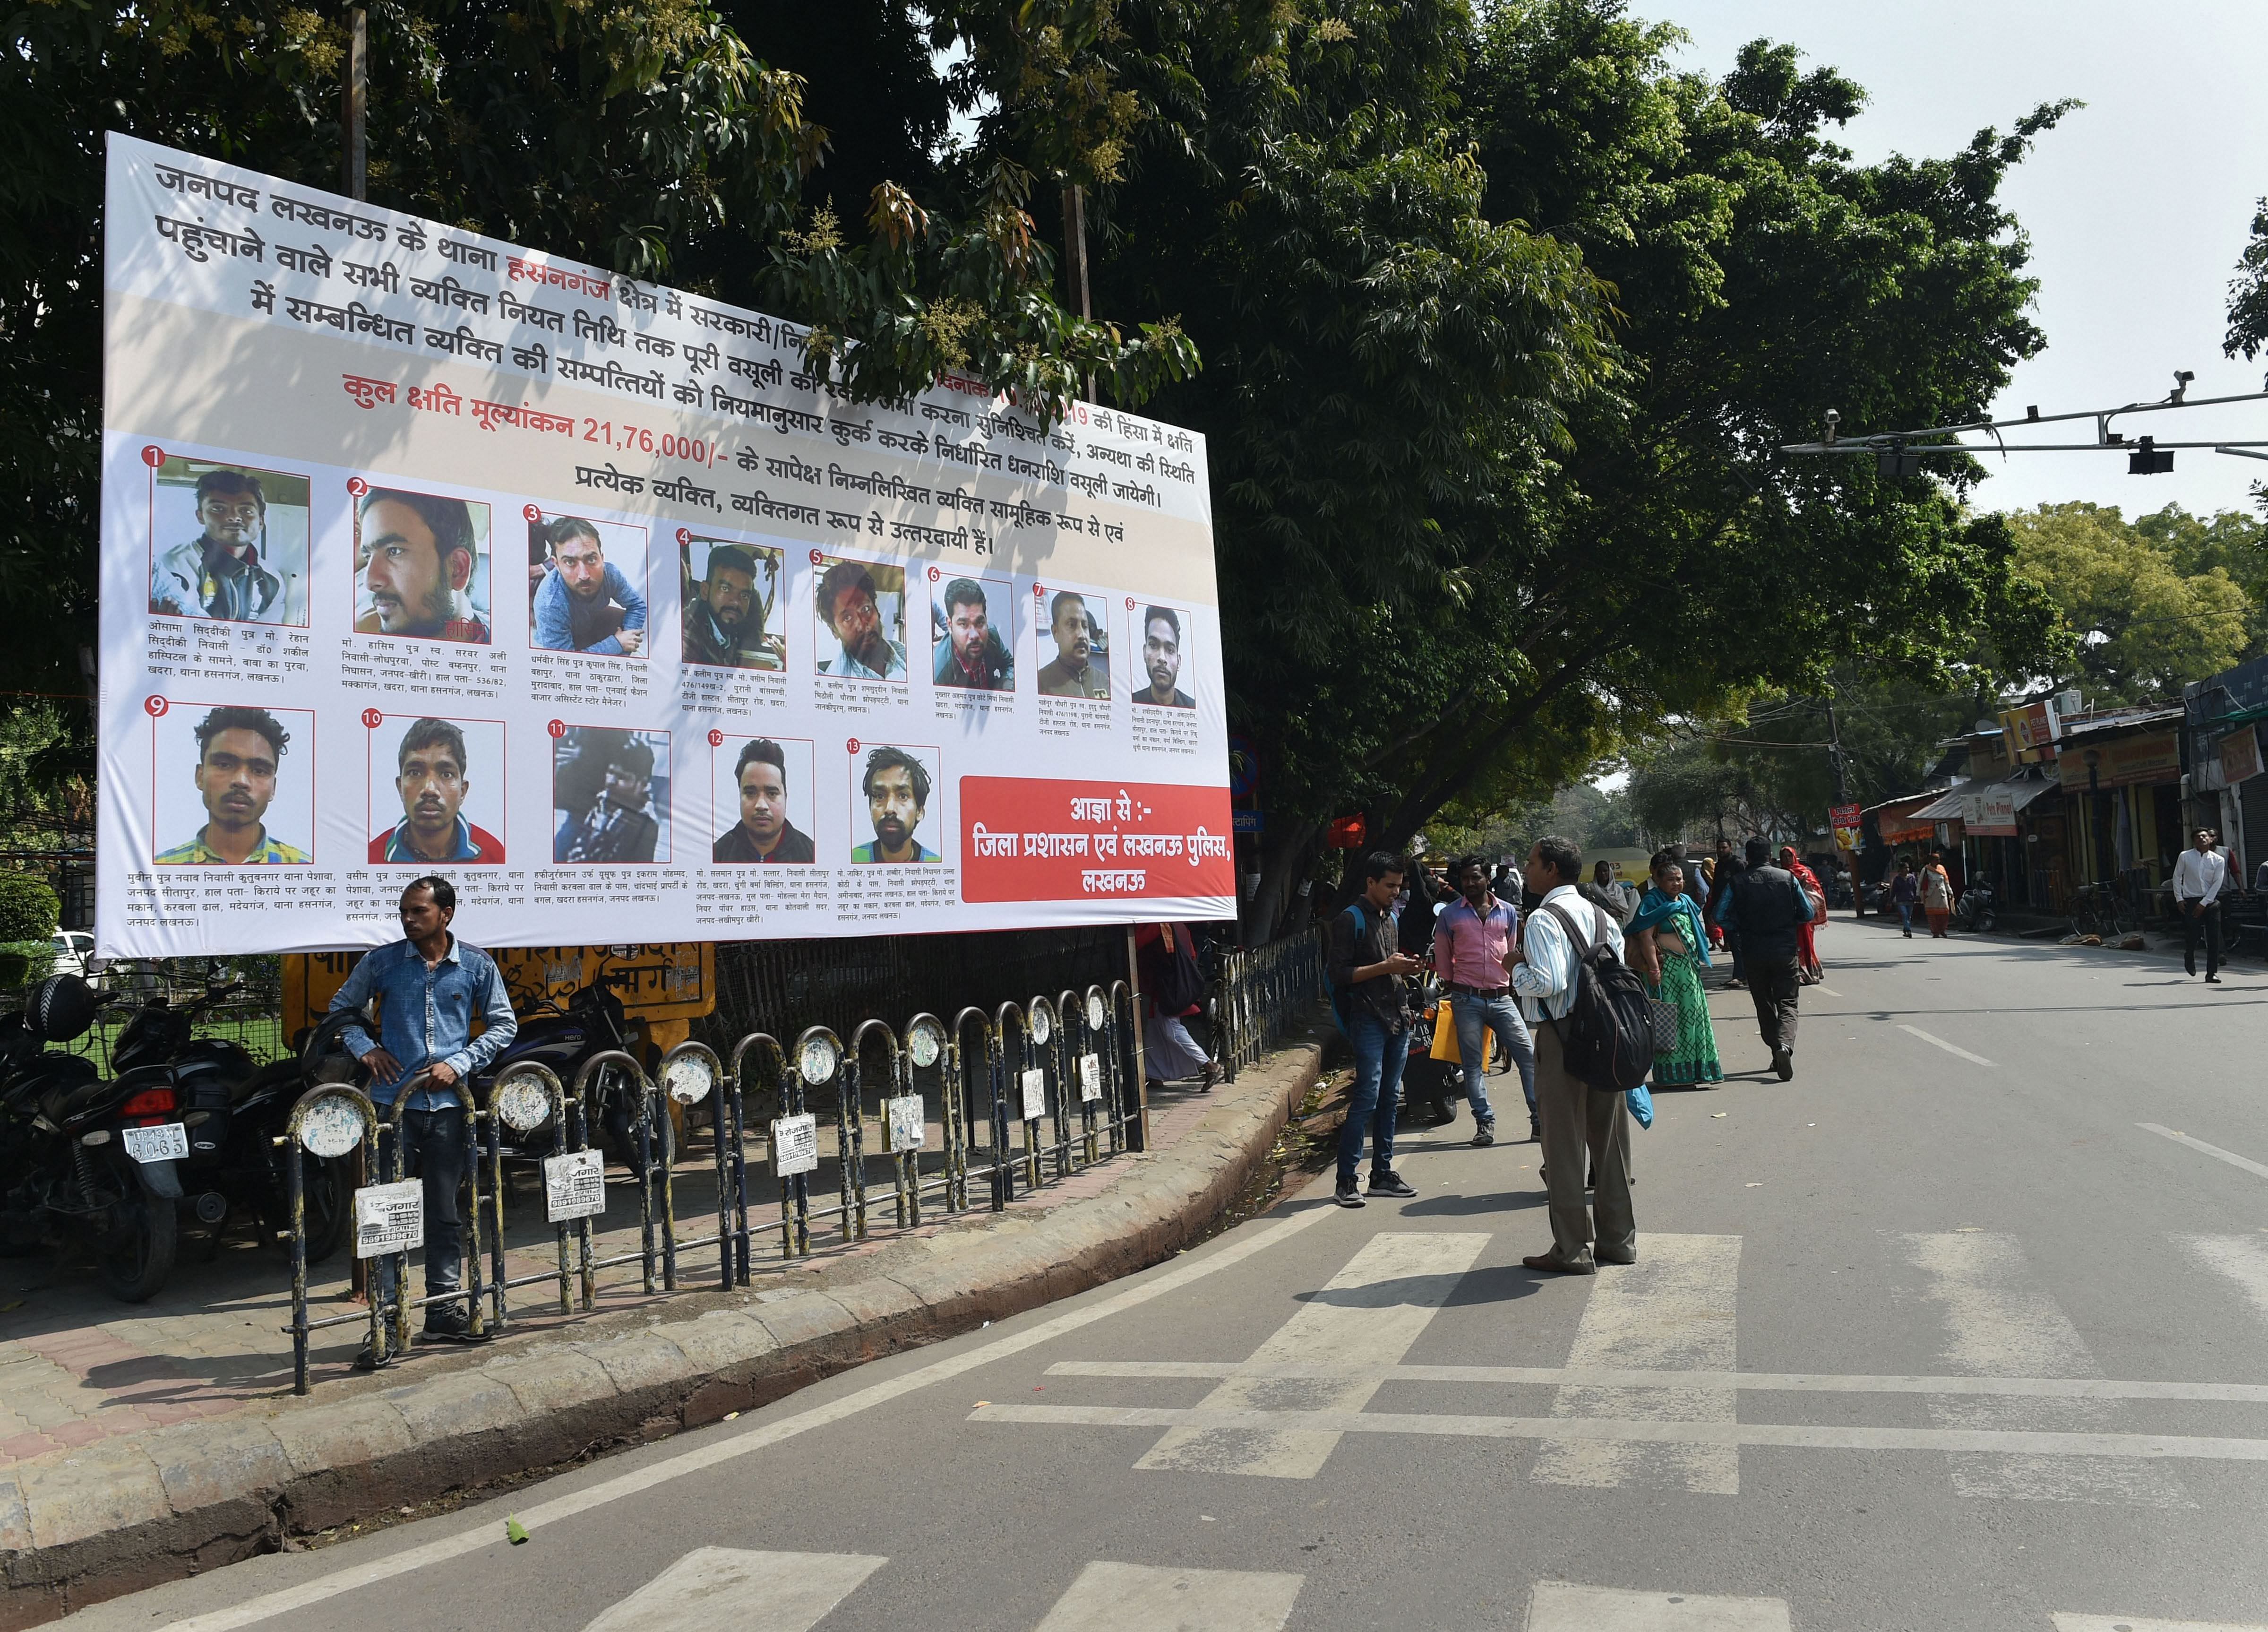 People walk past a poster displaying photographs of those who have been identified to pay the compensation for vandalizing public properties during protests against CAA, in Lucknow. (Credit: PTI)